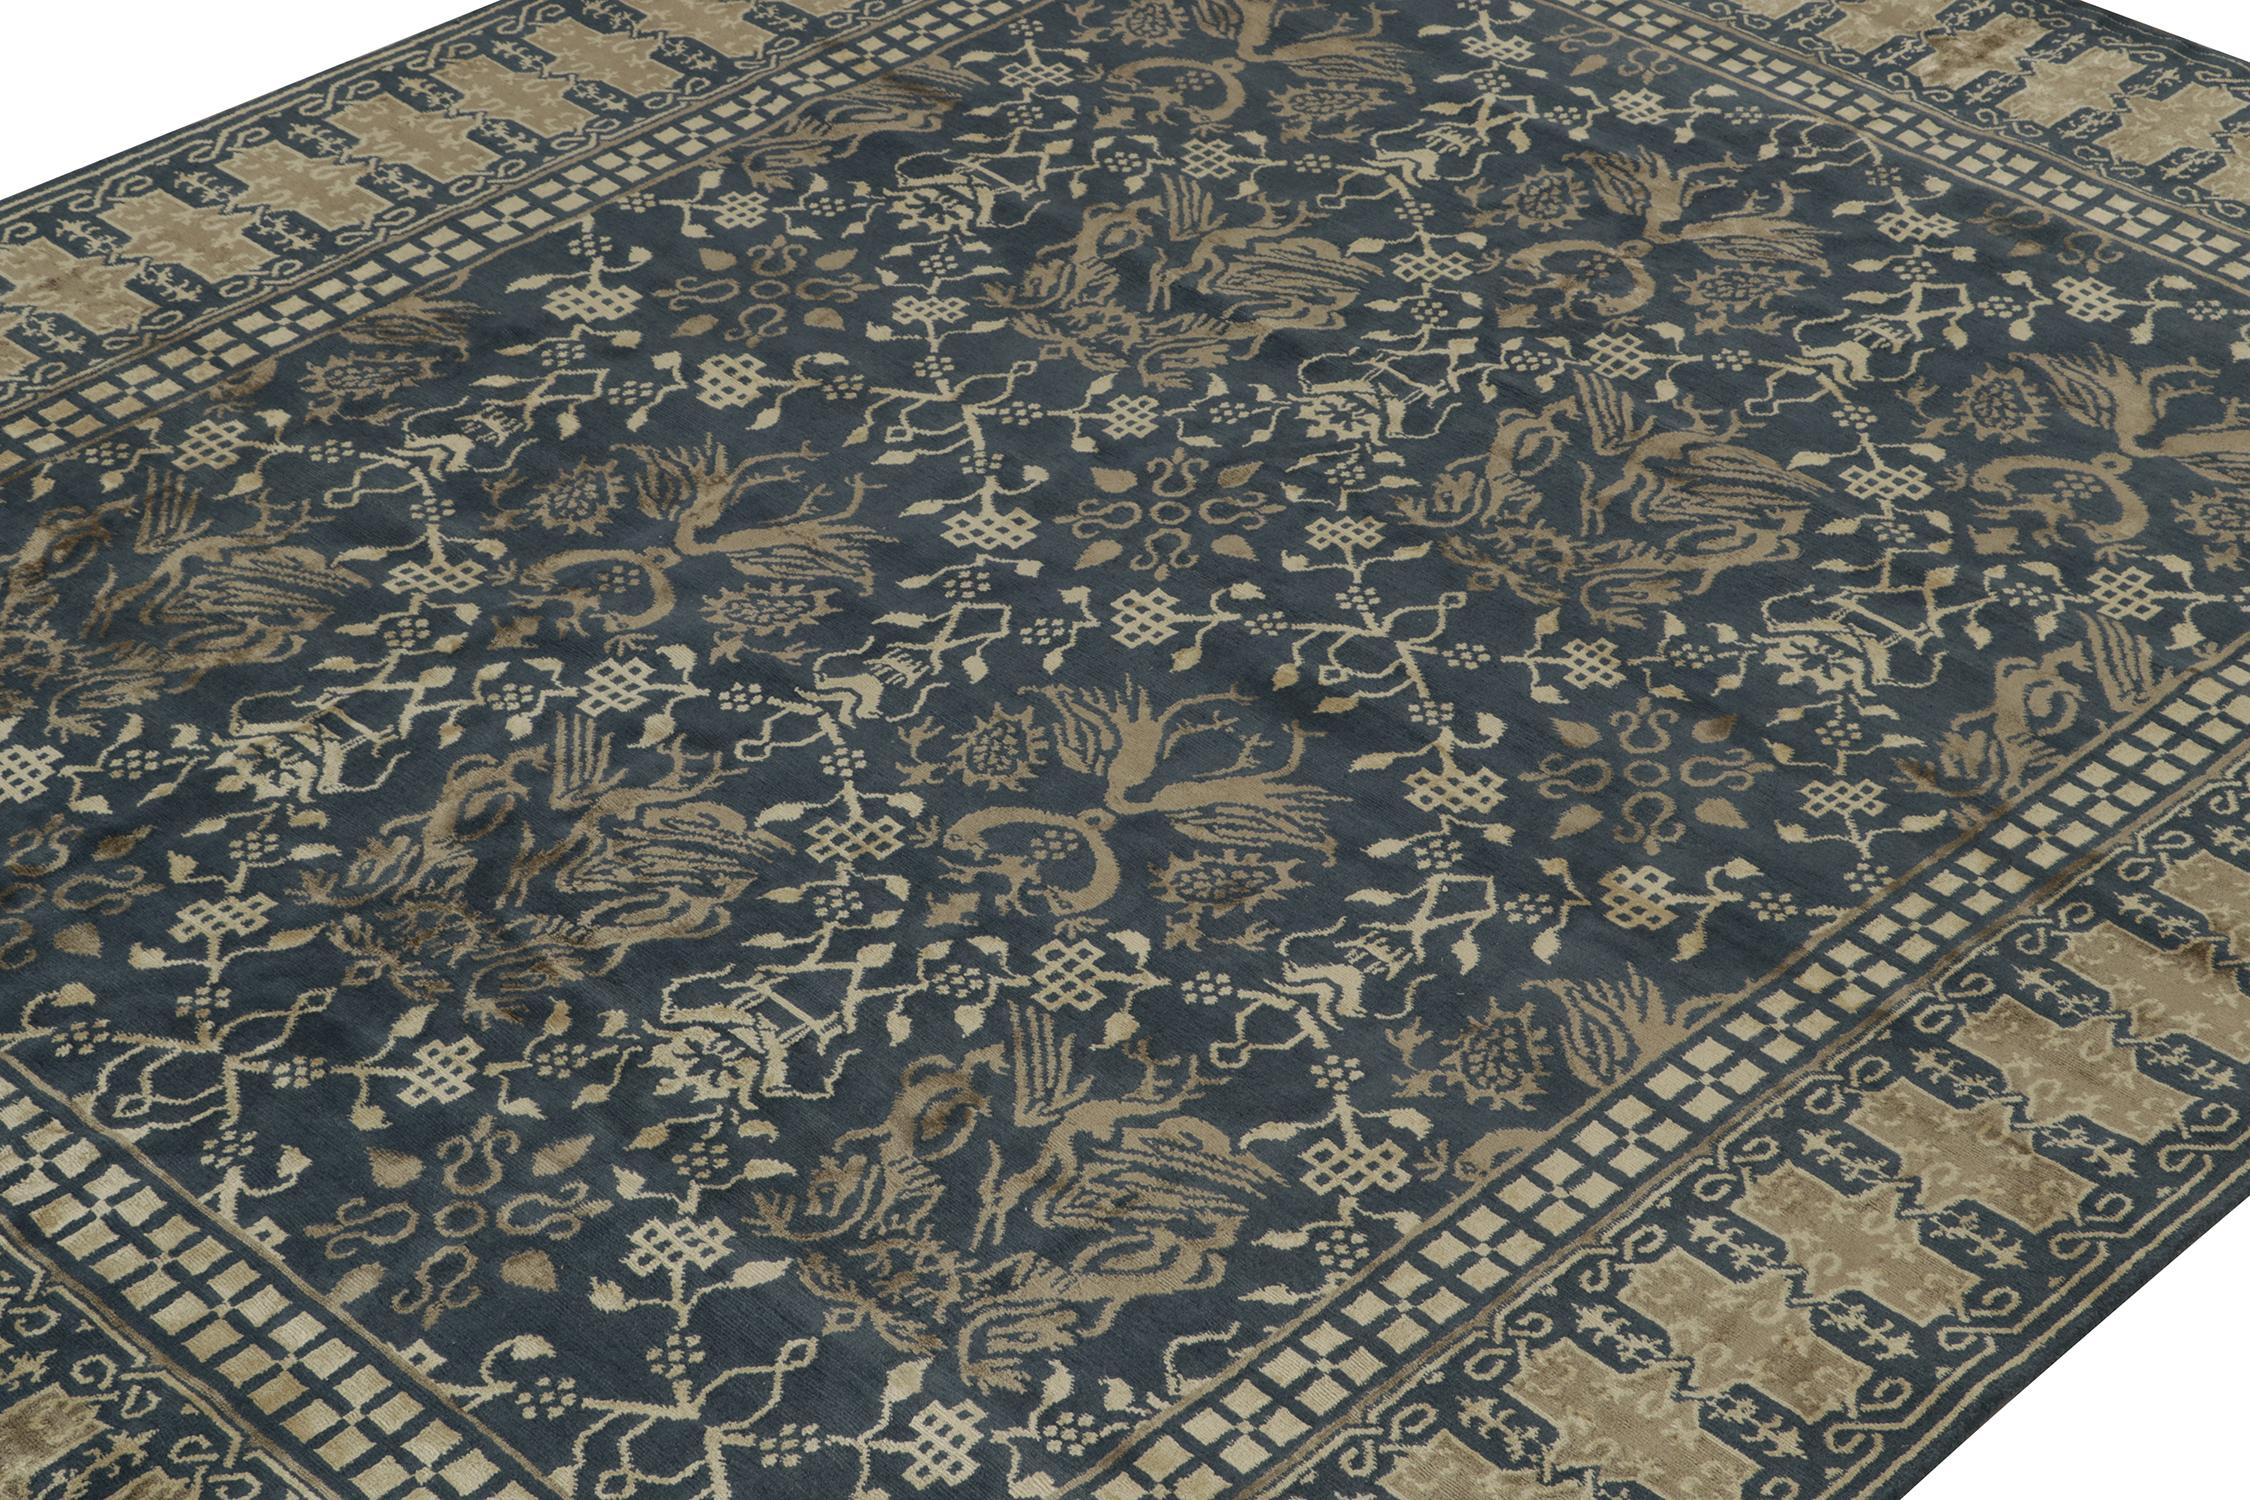 Hand-Knotted Rug & Kilim’s European style Pictorial rug in Blue with Gold Dragon Patterns For Sale